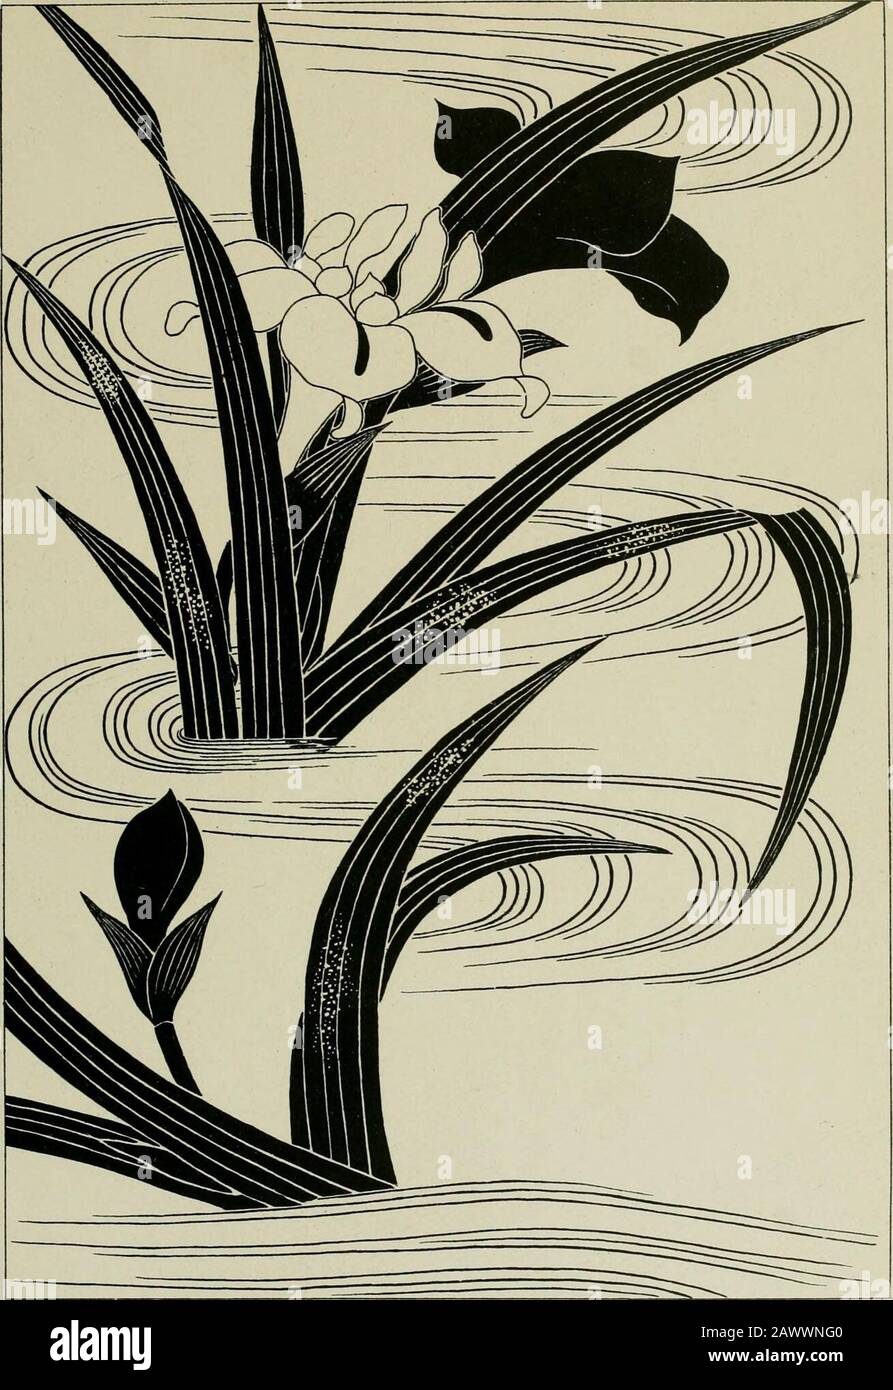 Studies in the decorative art of Japan . Plates 32 and 33. IRIS, GROWING IN A STREAM, CONVENTIONALISED. 0J3 HJ m ft x. sb* *fa *fei sfa *i&gt; X i! Si (1 m m 1 m H -p. ! * m 1 + + /4» SJyyjxyjyrfjS X — ?^ ^ ¥ -t y ji fl — + ep # PfJ $£? ^ A m *f ffiij ft ft m 0f # * a H B #* ** % £ « PP *? ;n 3r Jll 4 iii 3r Jll m p$ V n 0 «$ 1 us 1 t &gt;J 1$ ft JBi] # Nt 1 TM 1 Hf n | 01 A X at 1 St  m n i at  m r Th- if TtJ y rff T- t illT :/ aiT 4 111 T Vs i/ l -f 2 K m  ur 1 r ^•» %  •?»    + t? =* + 9 + y + •&gt; m — # § i X. # m 3 9 m /i* m 1 Jill 2&gt;4- ;t* !&gt; ] S •y / S V *fe » 1* it ^ y 5 Stock Photo